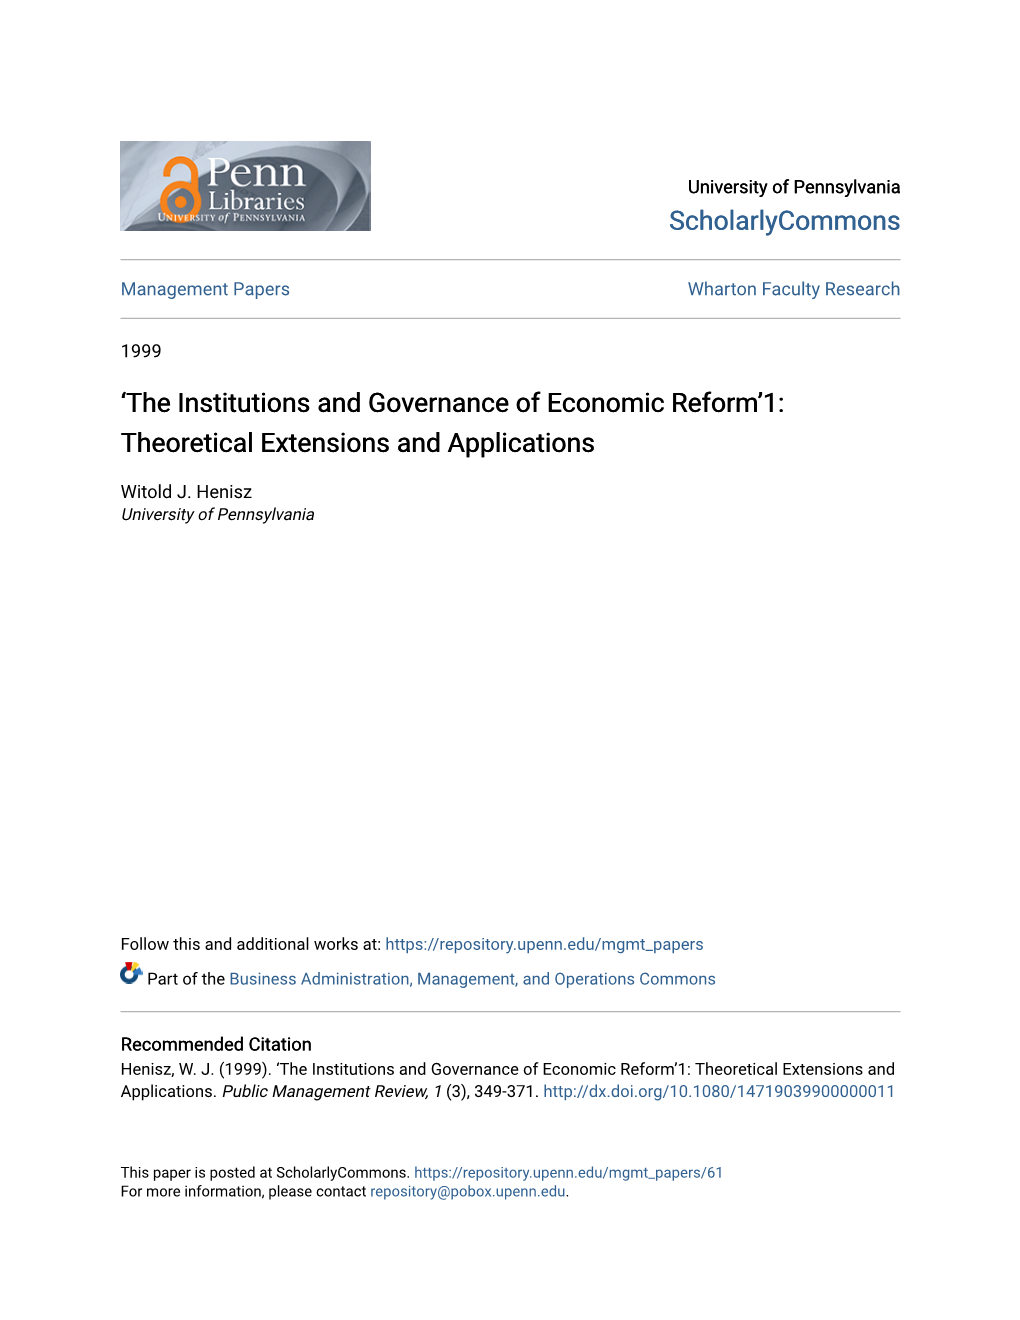 The Institutions and Governance of Economic Reform’1: Theoretical Extensions and Applications